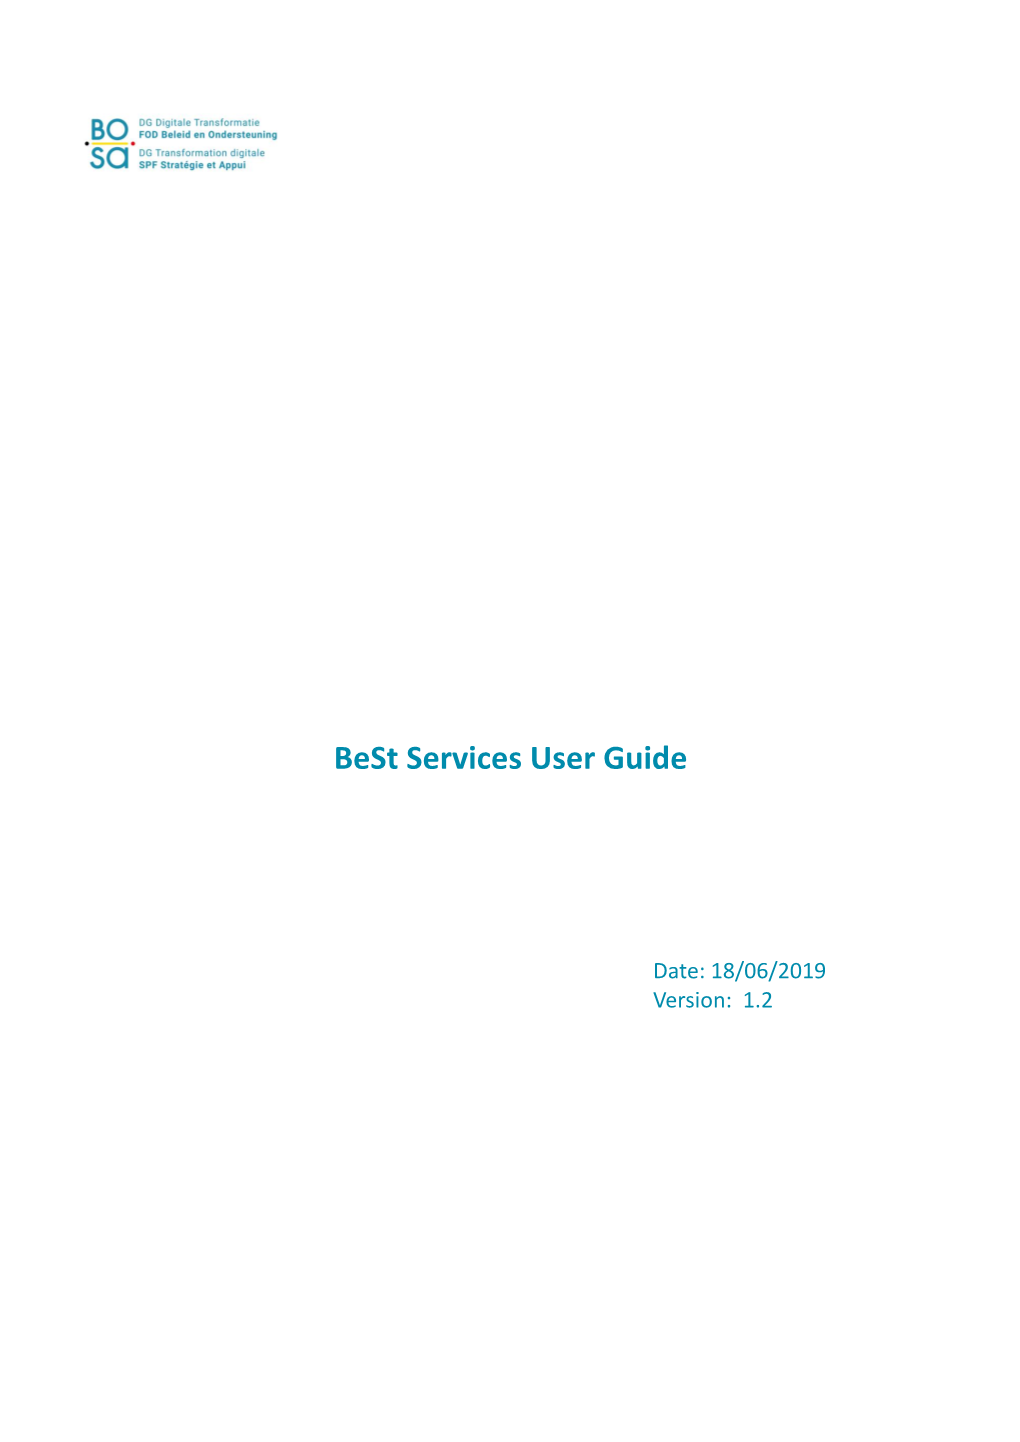 Best Services User Guide